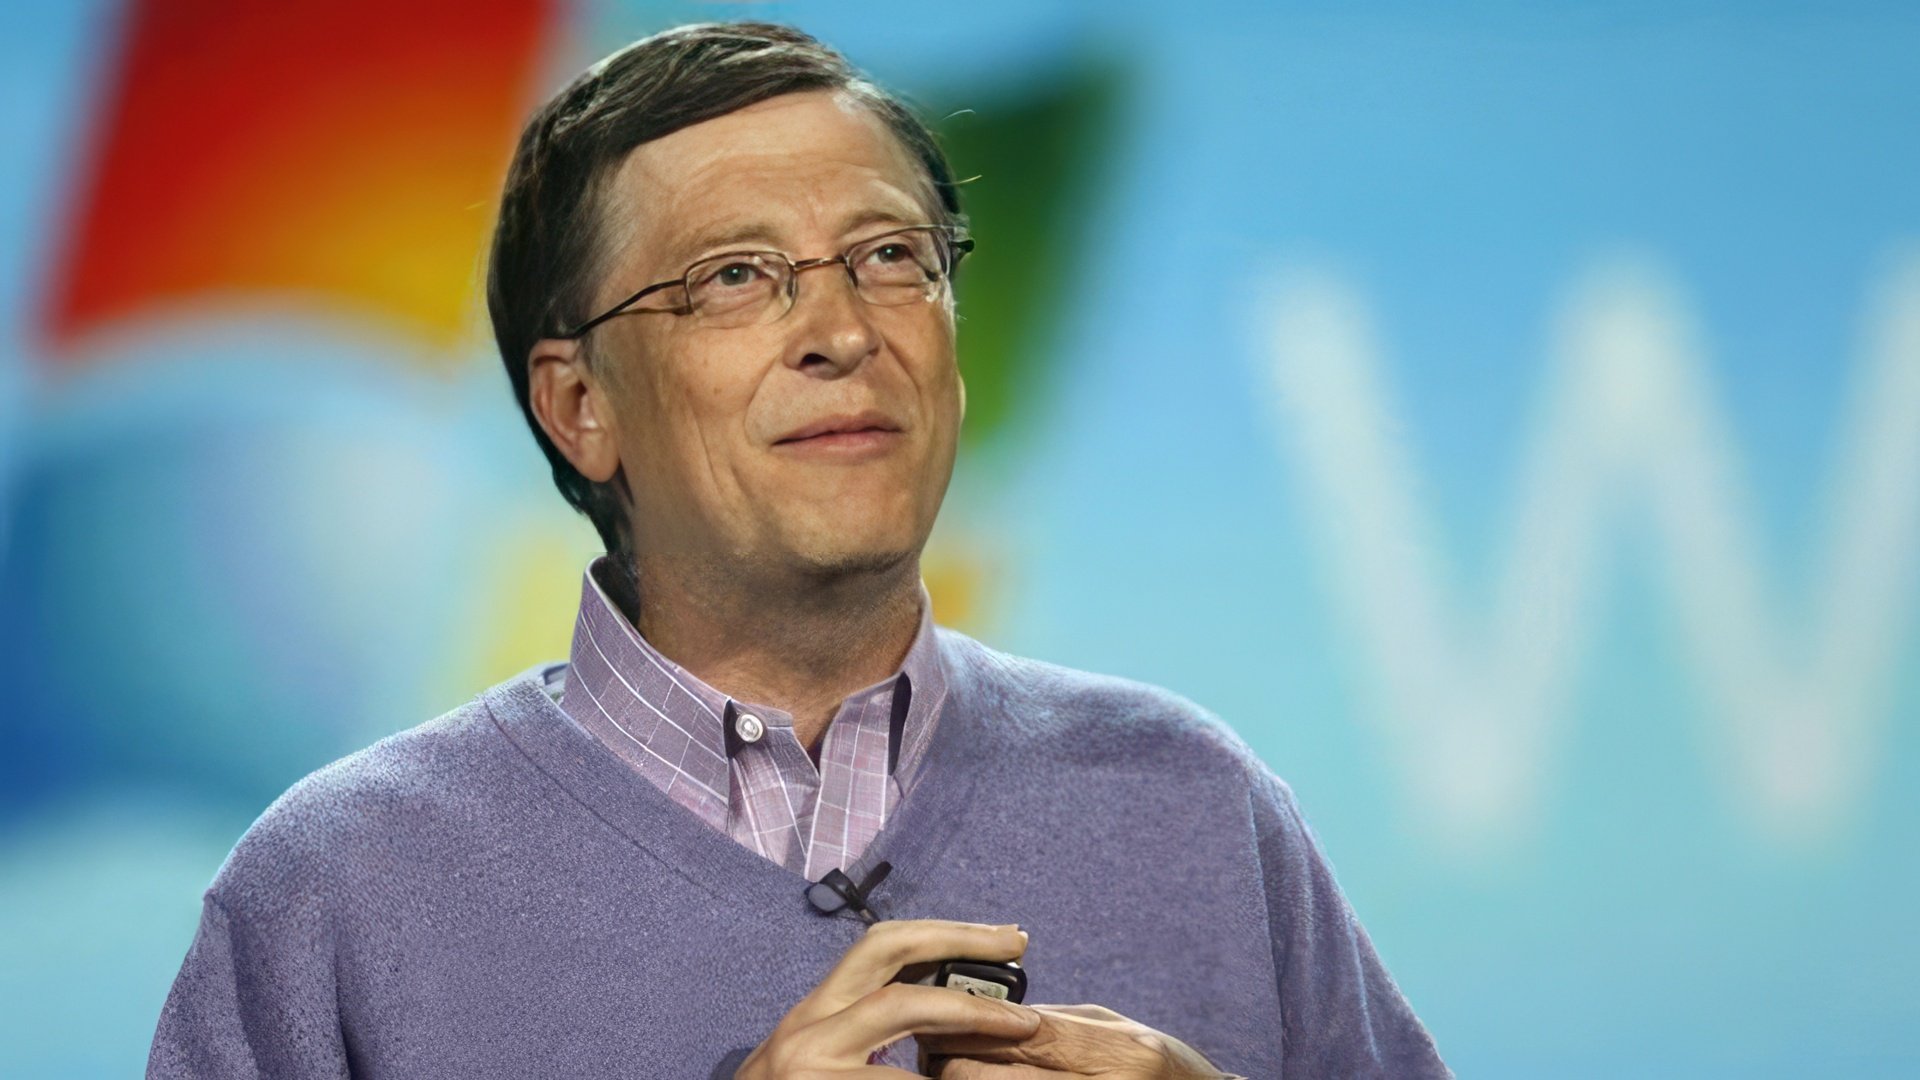 In June 2008, Bill Gates stepped down as the head of Microsoft